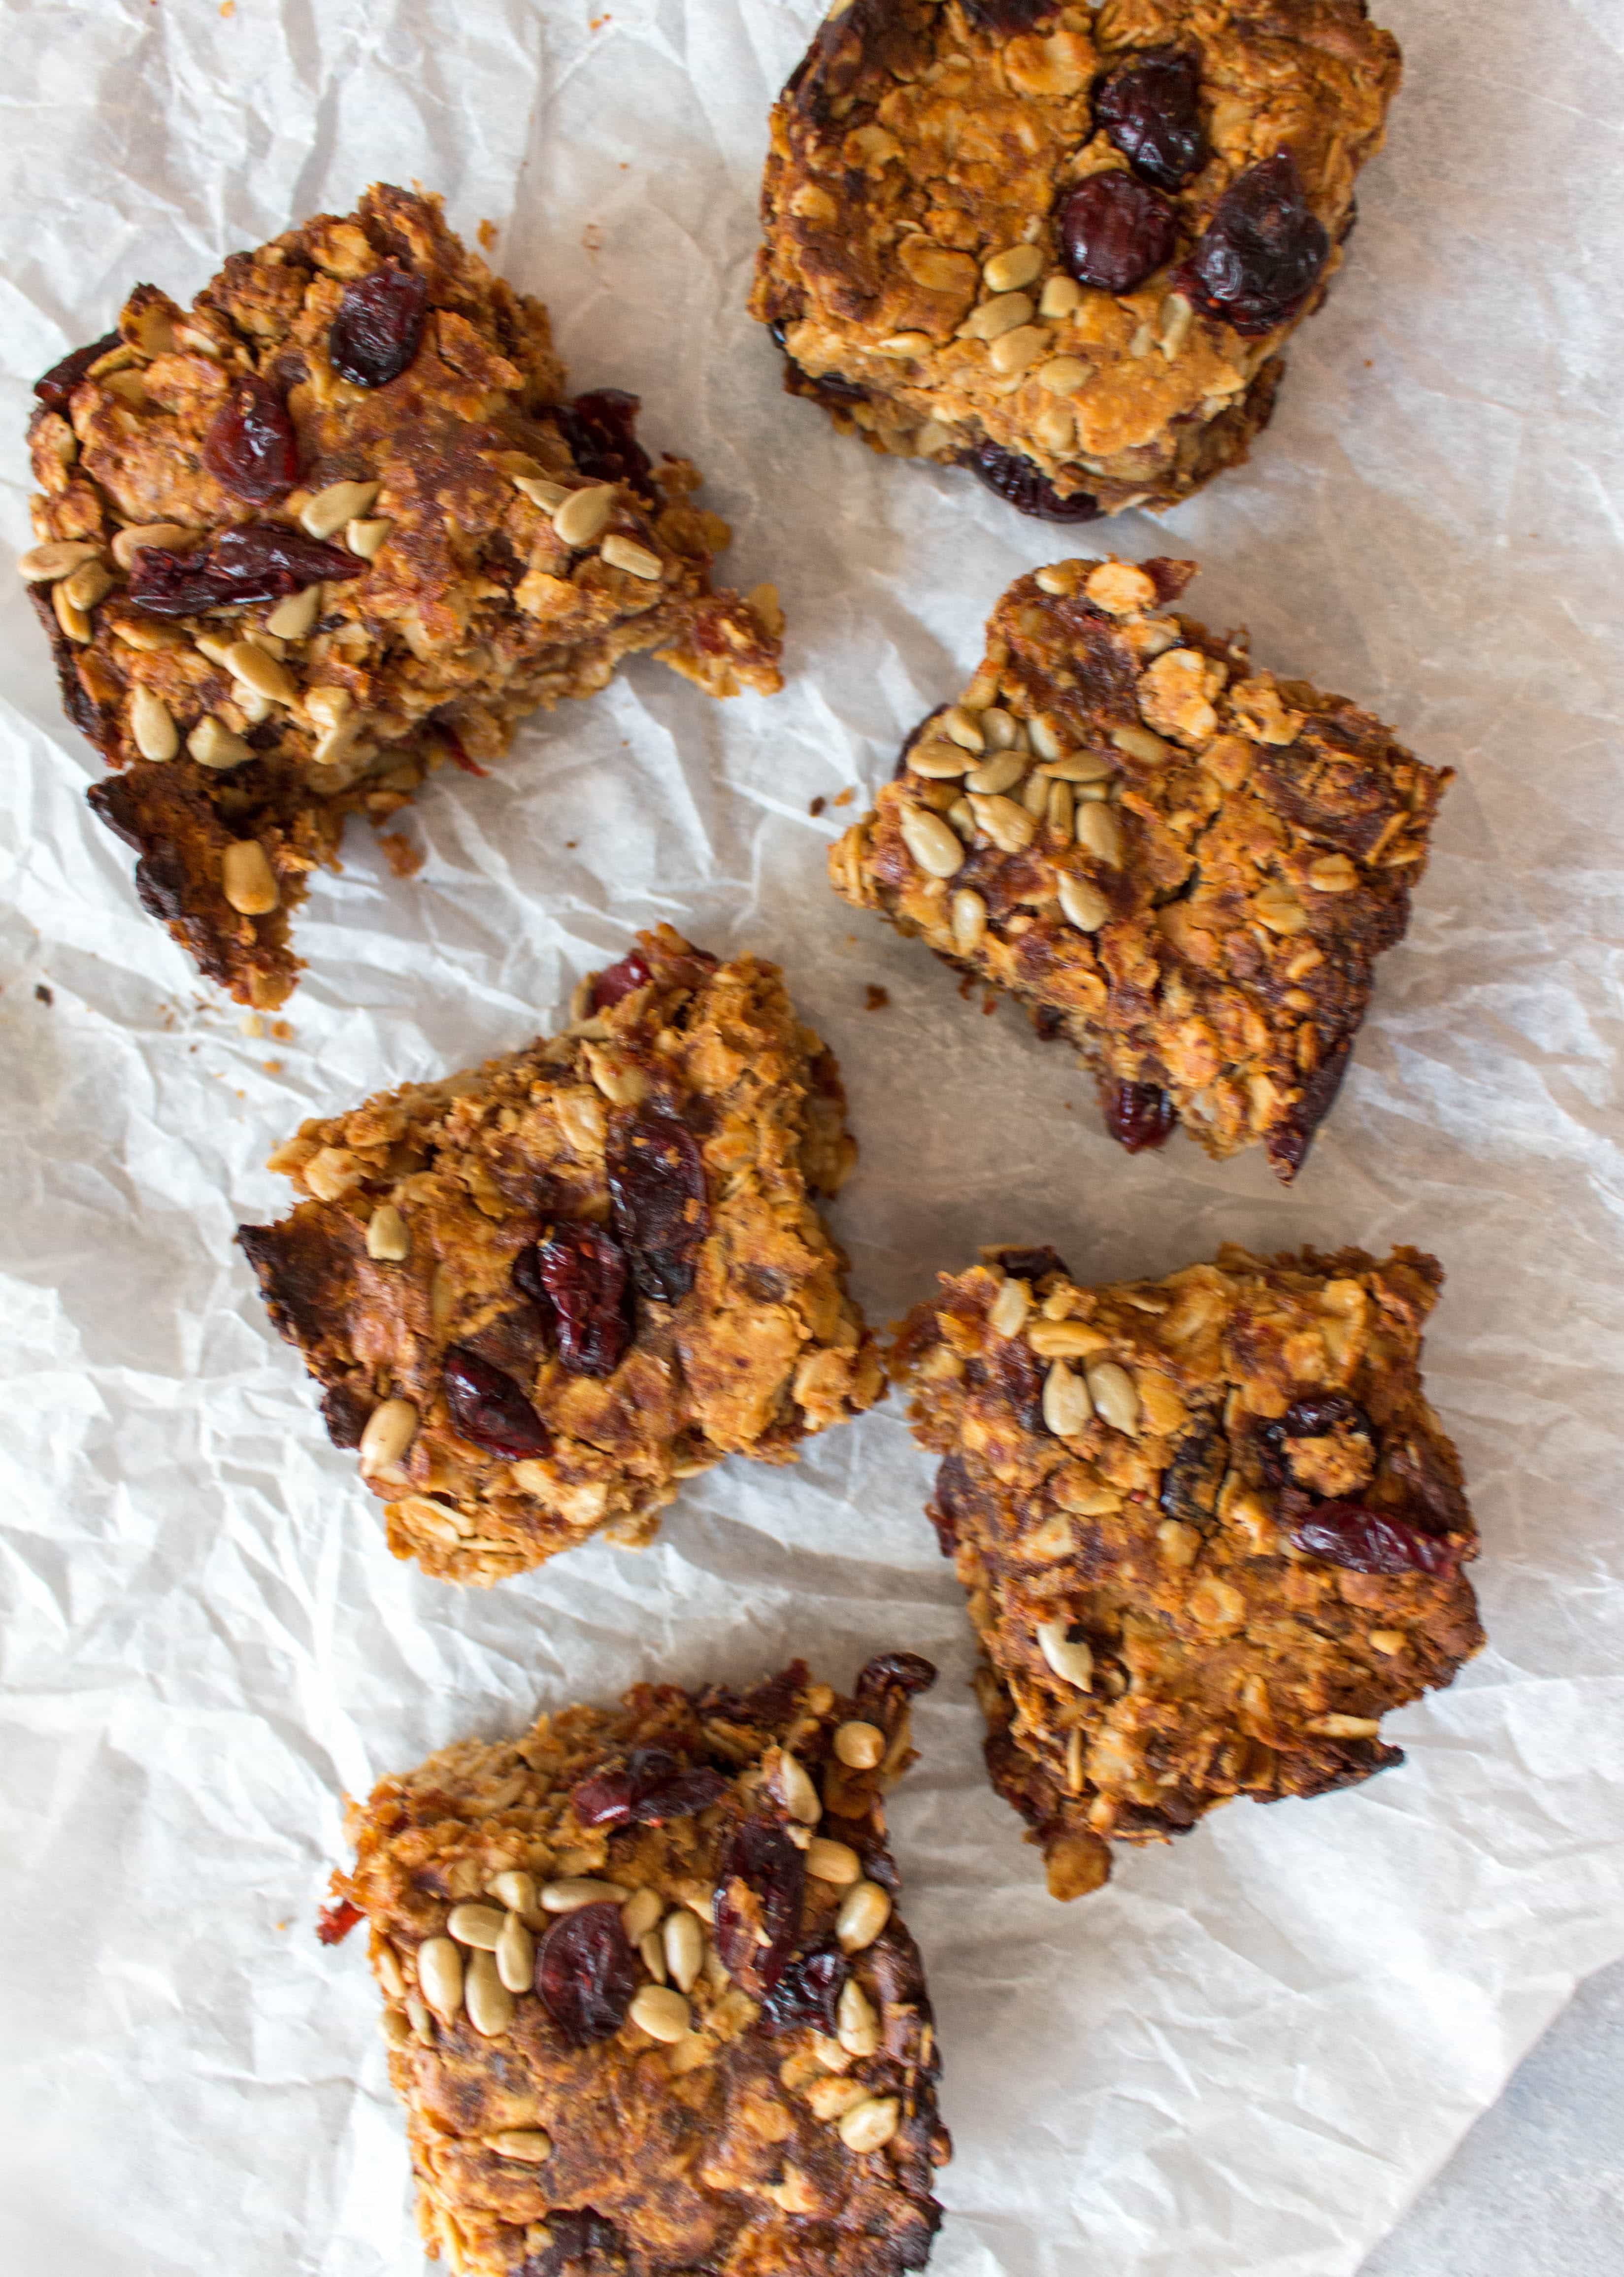 Need a peanut butter energy bar recipe? Try this delicious and healthy peanut butter and dates energy bar!